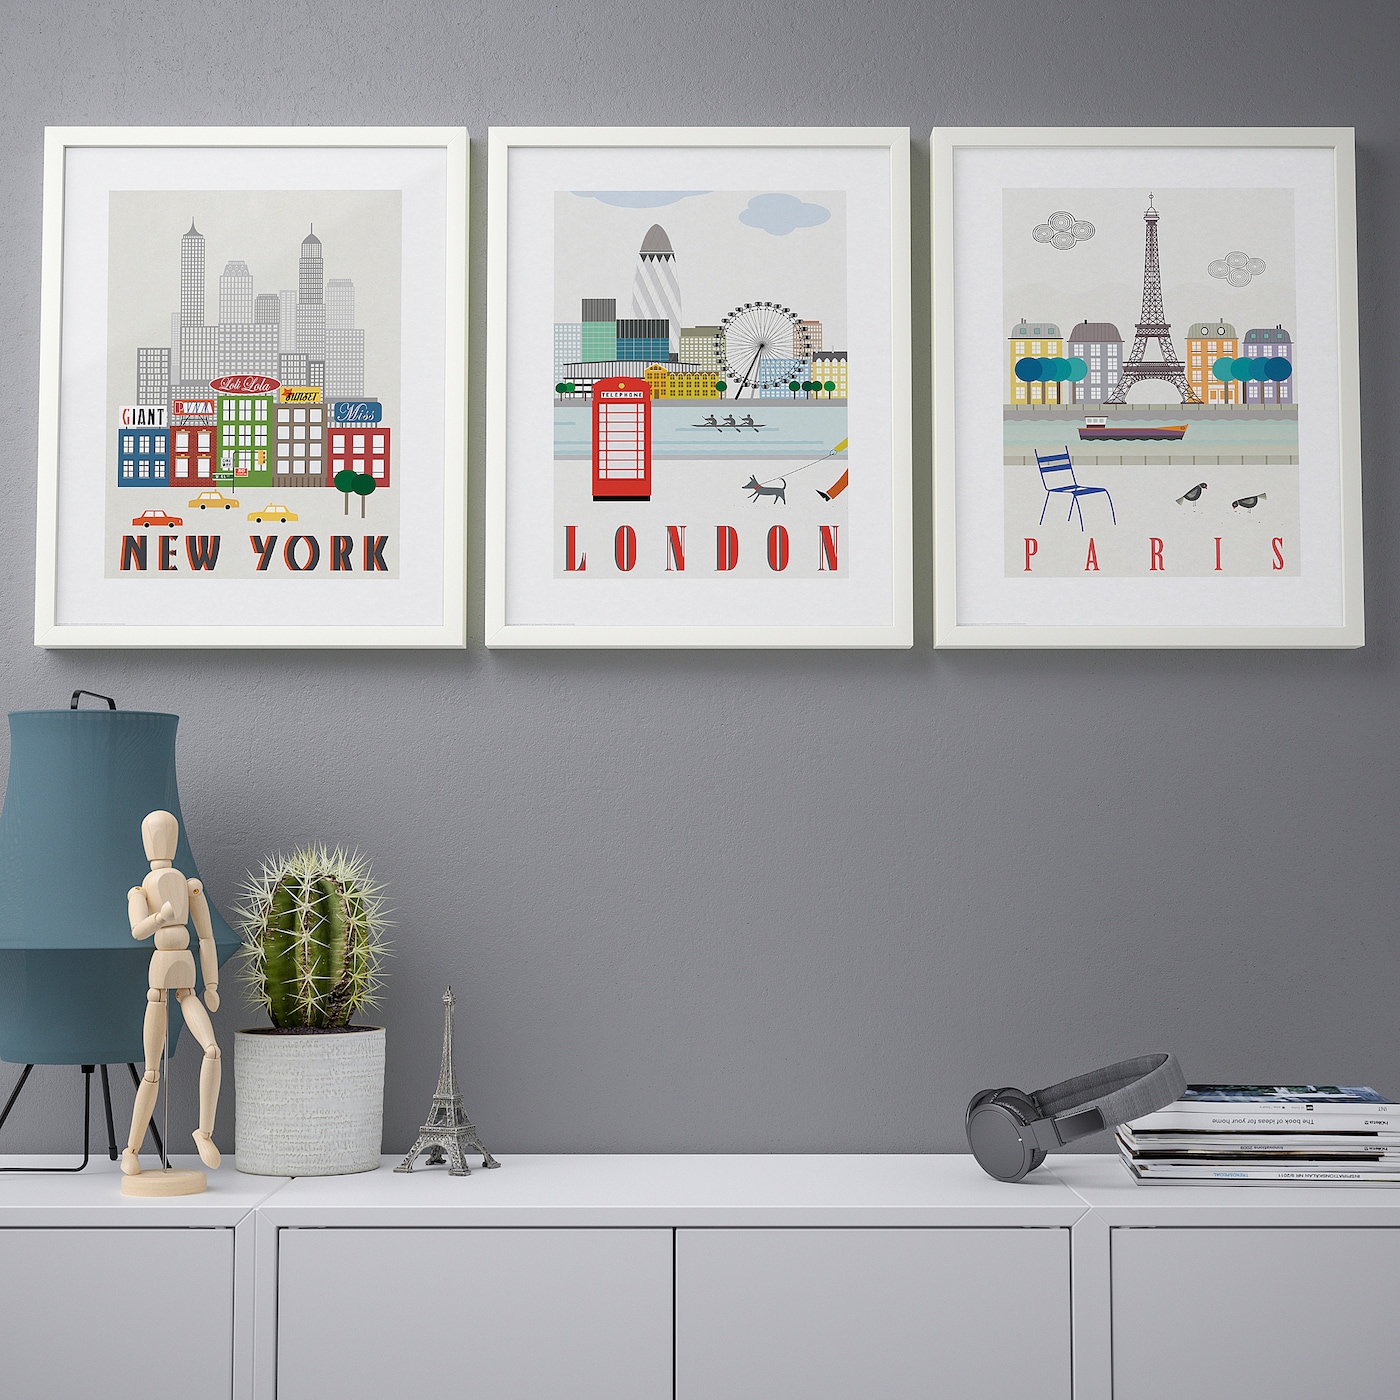 ikea pictures and posters